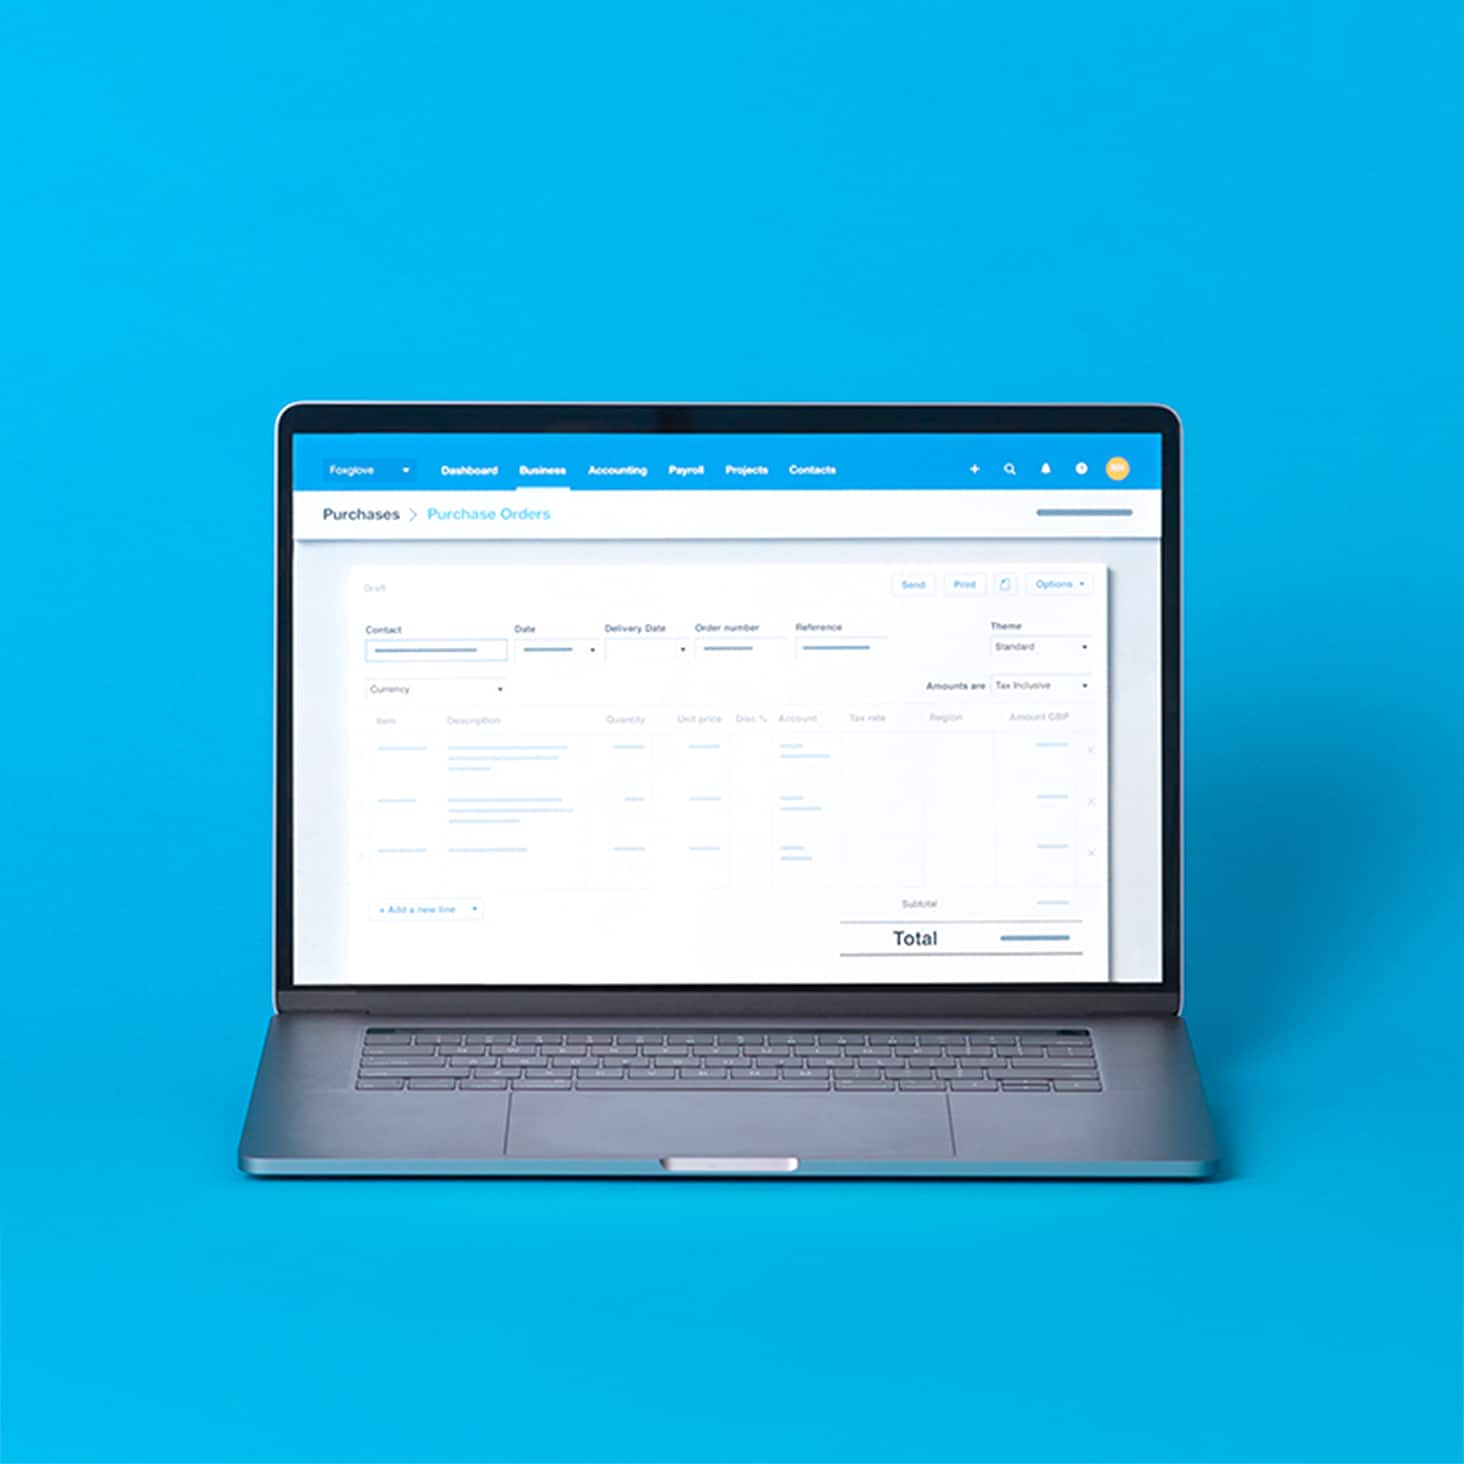 The details of an order are entered into the purchase order screen in Xero on a laptop.  